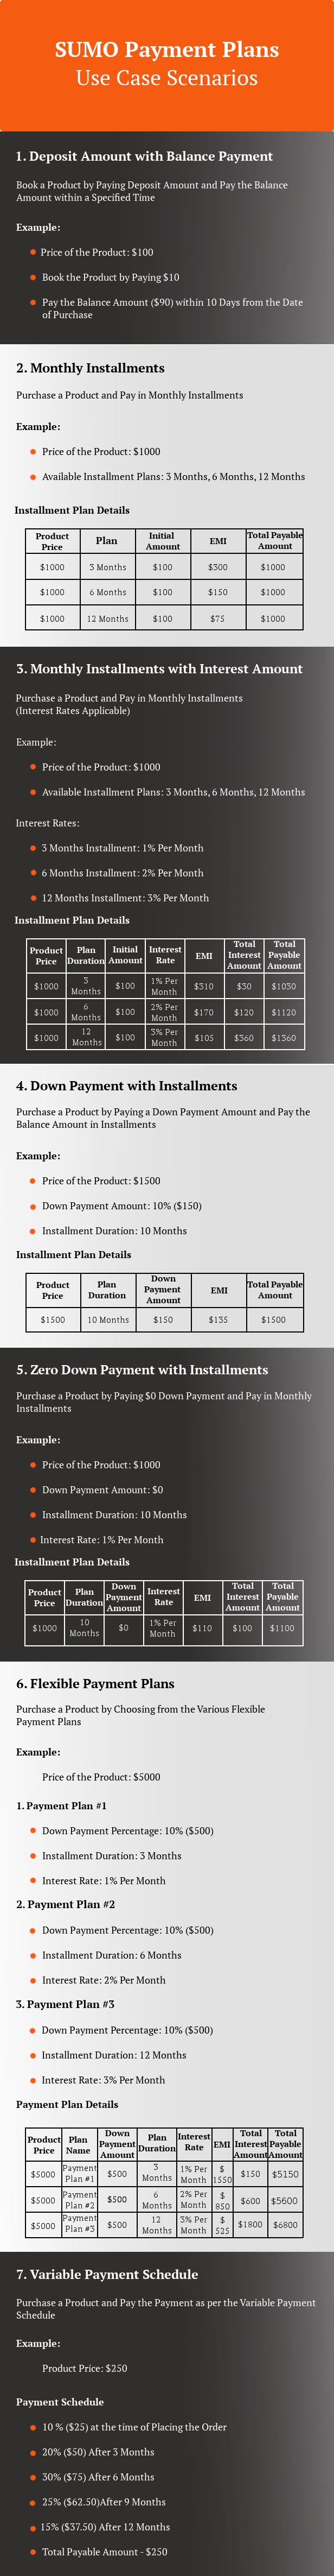 SUMO WooCommerce Payment Plans - Deposits, Down Payments, Installments, Variable Payments etc - 3